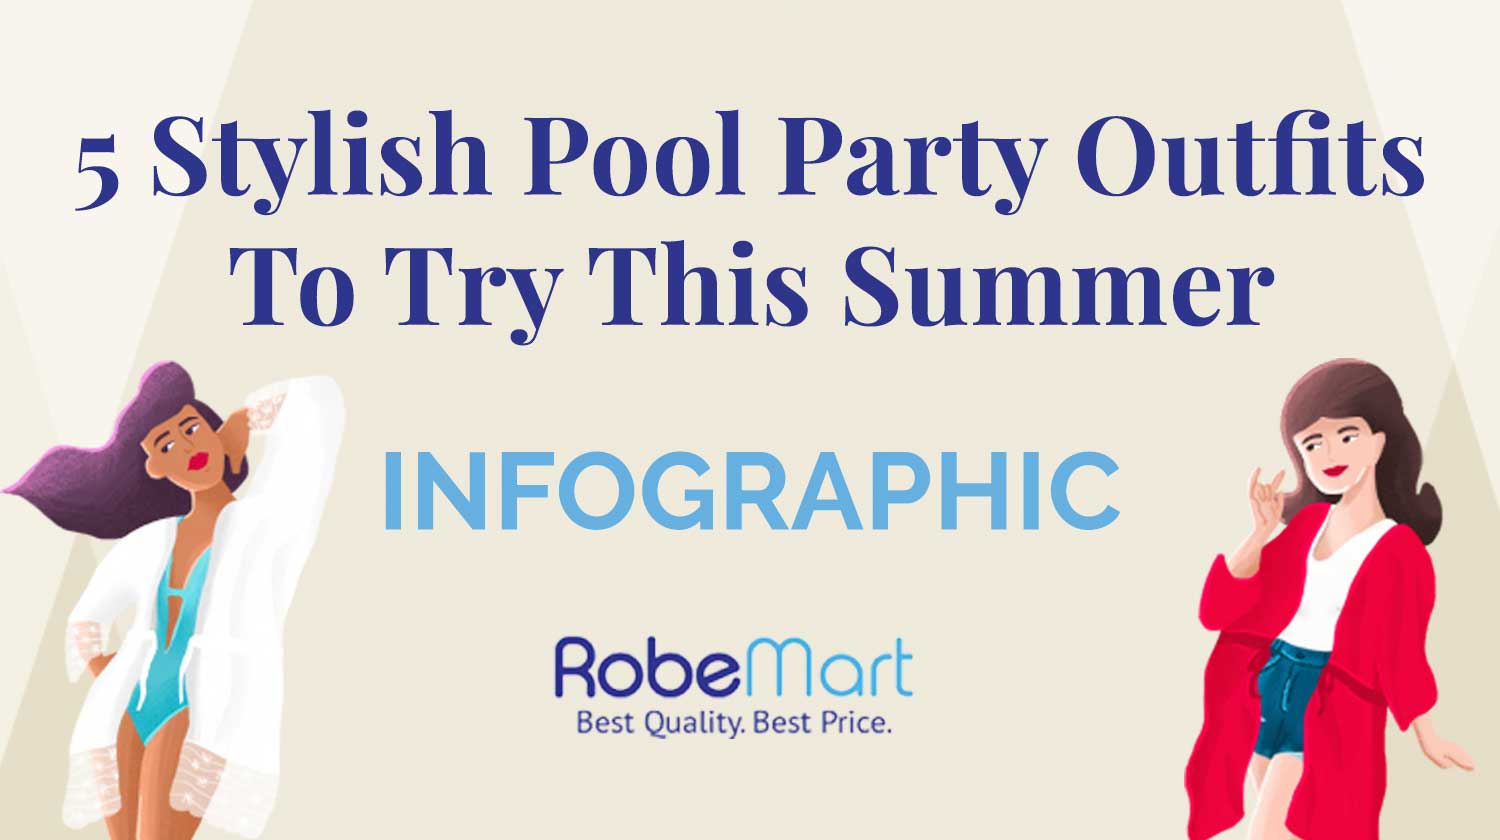 5 Stylish Pool Party Outfits To Try This Summer